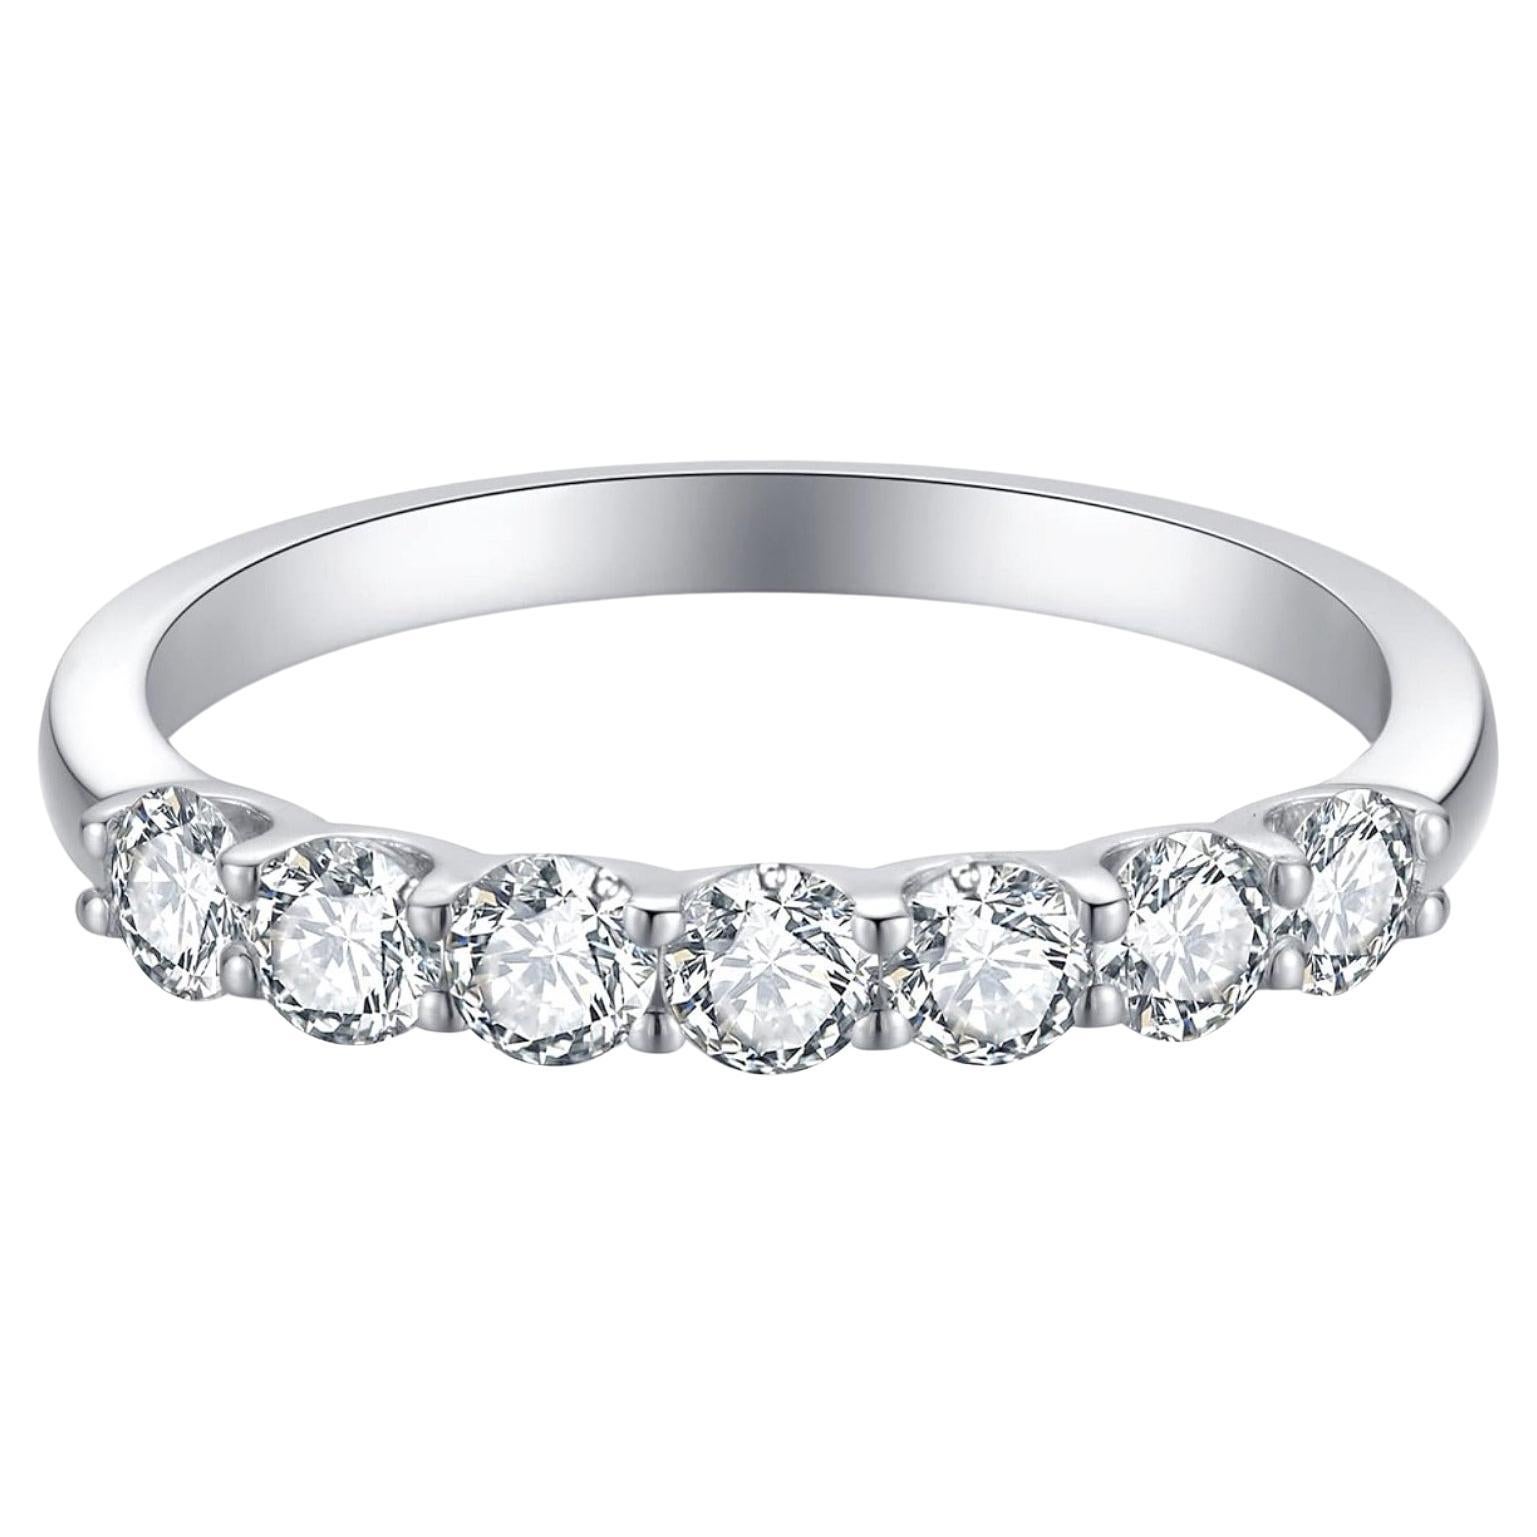 18K White Gold Half Eternity Ring with Round Brilliant Diamonds (Made to Order) For Sale